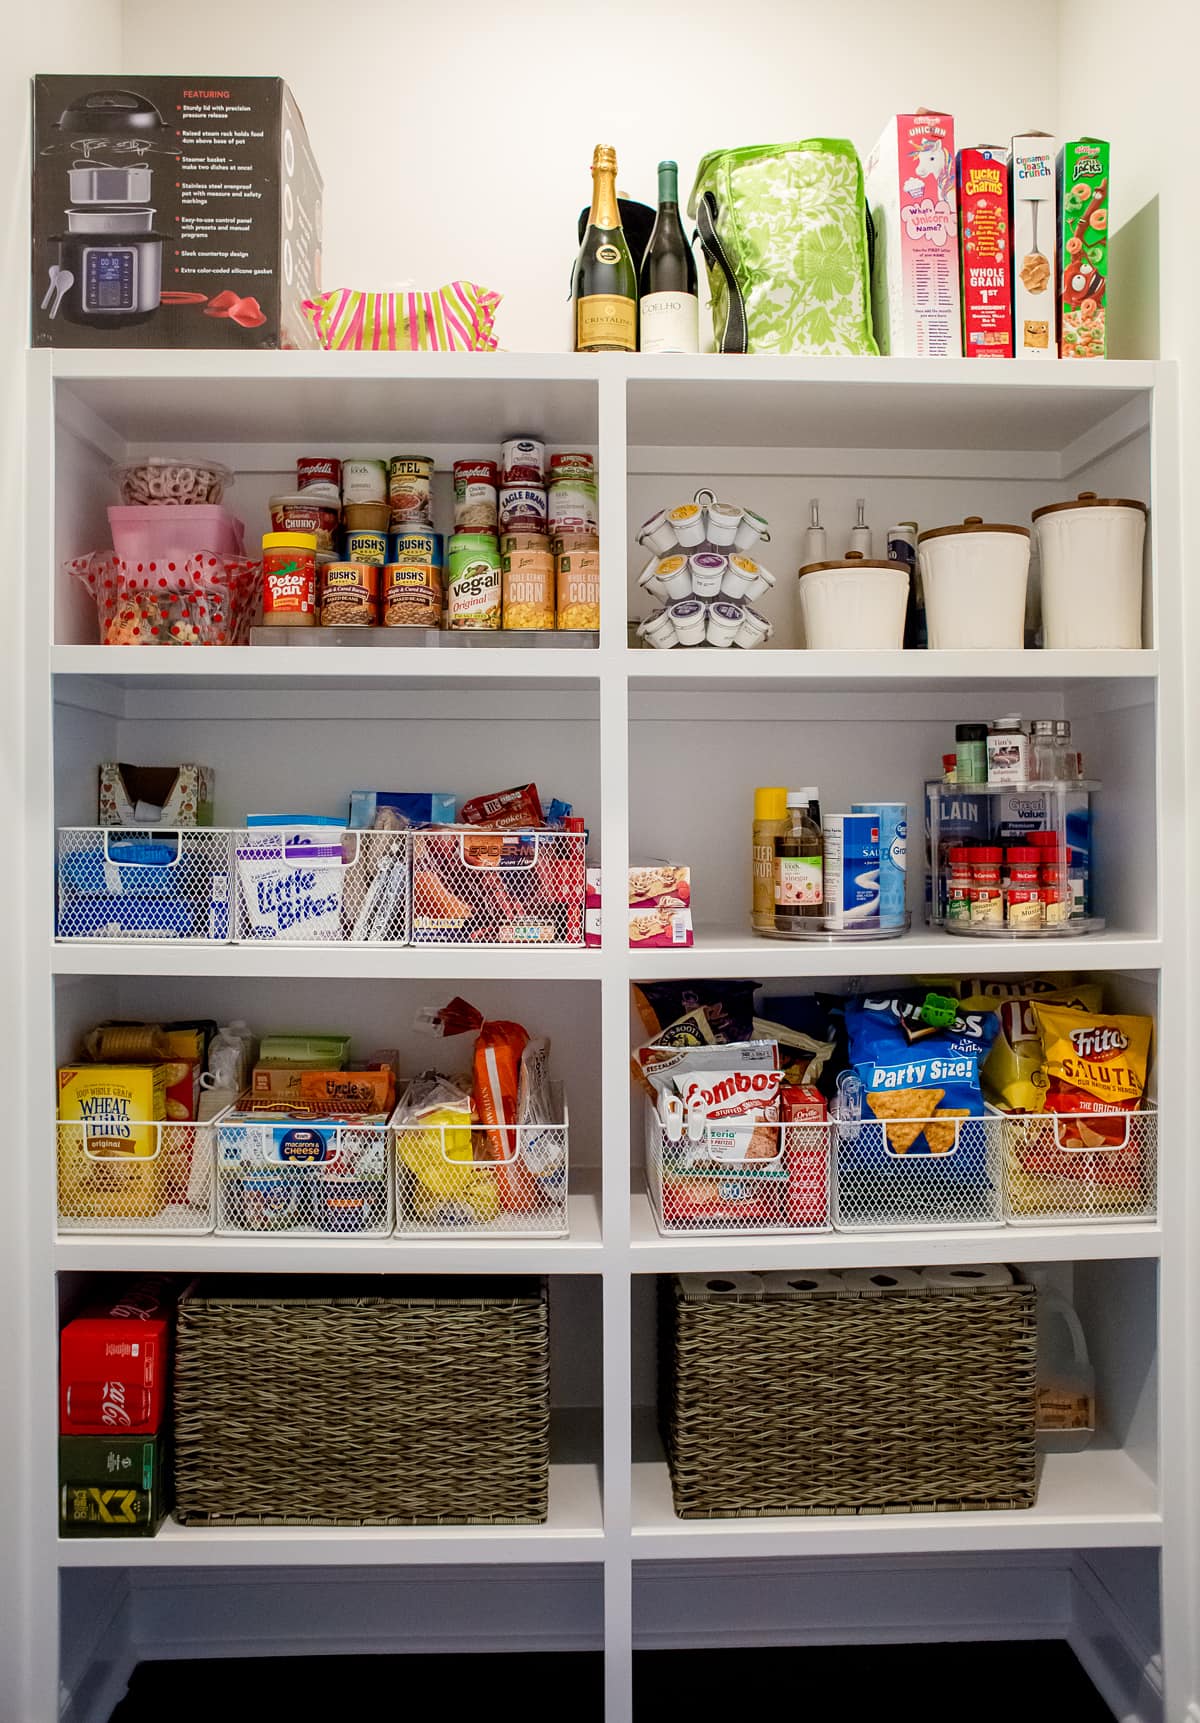 6 Steps To Pantry Organization For A Relaxed Holiday Season